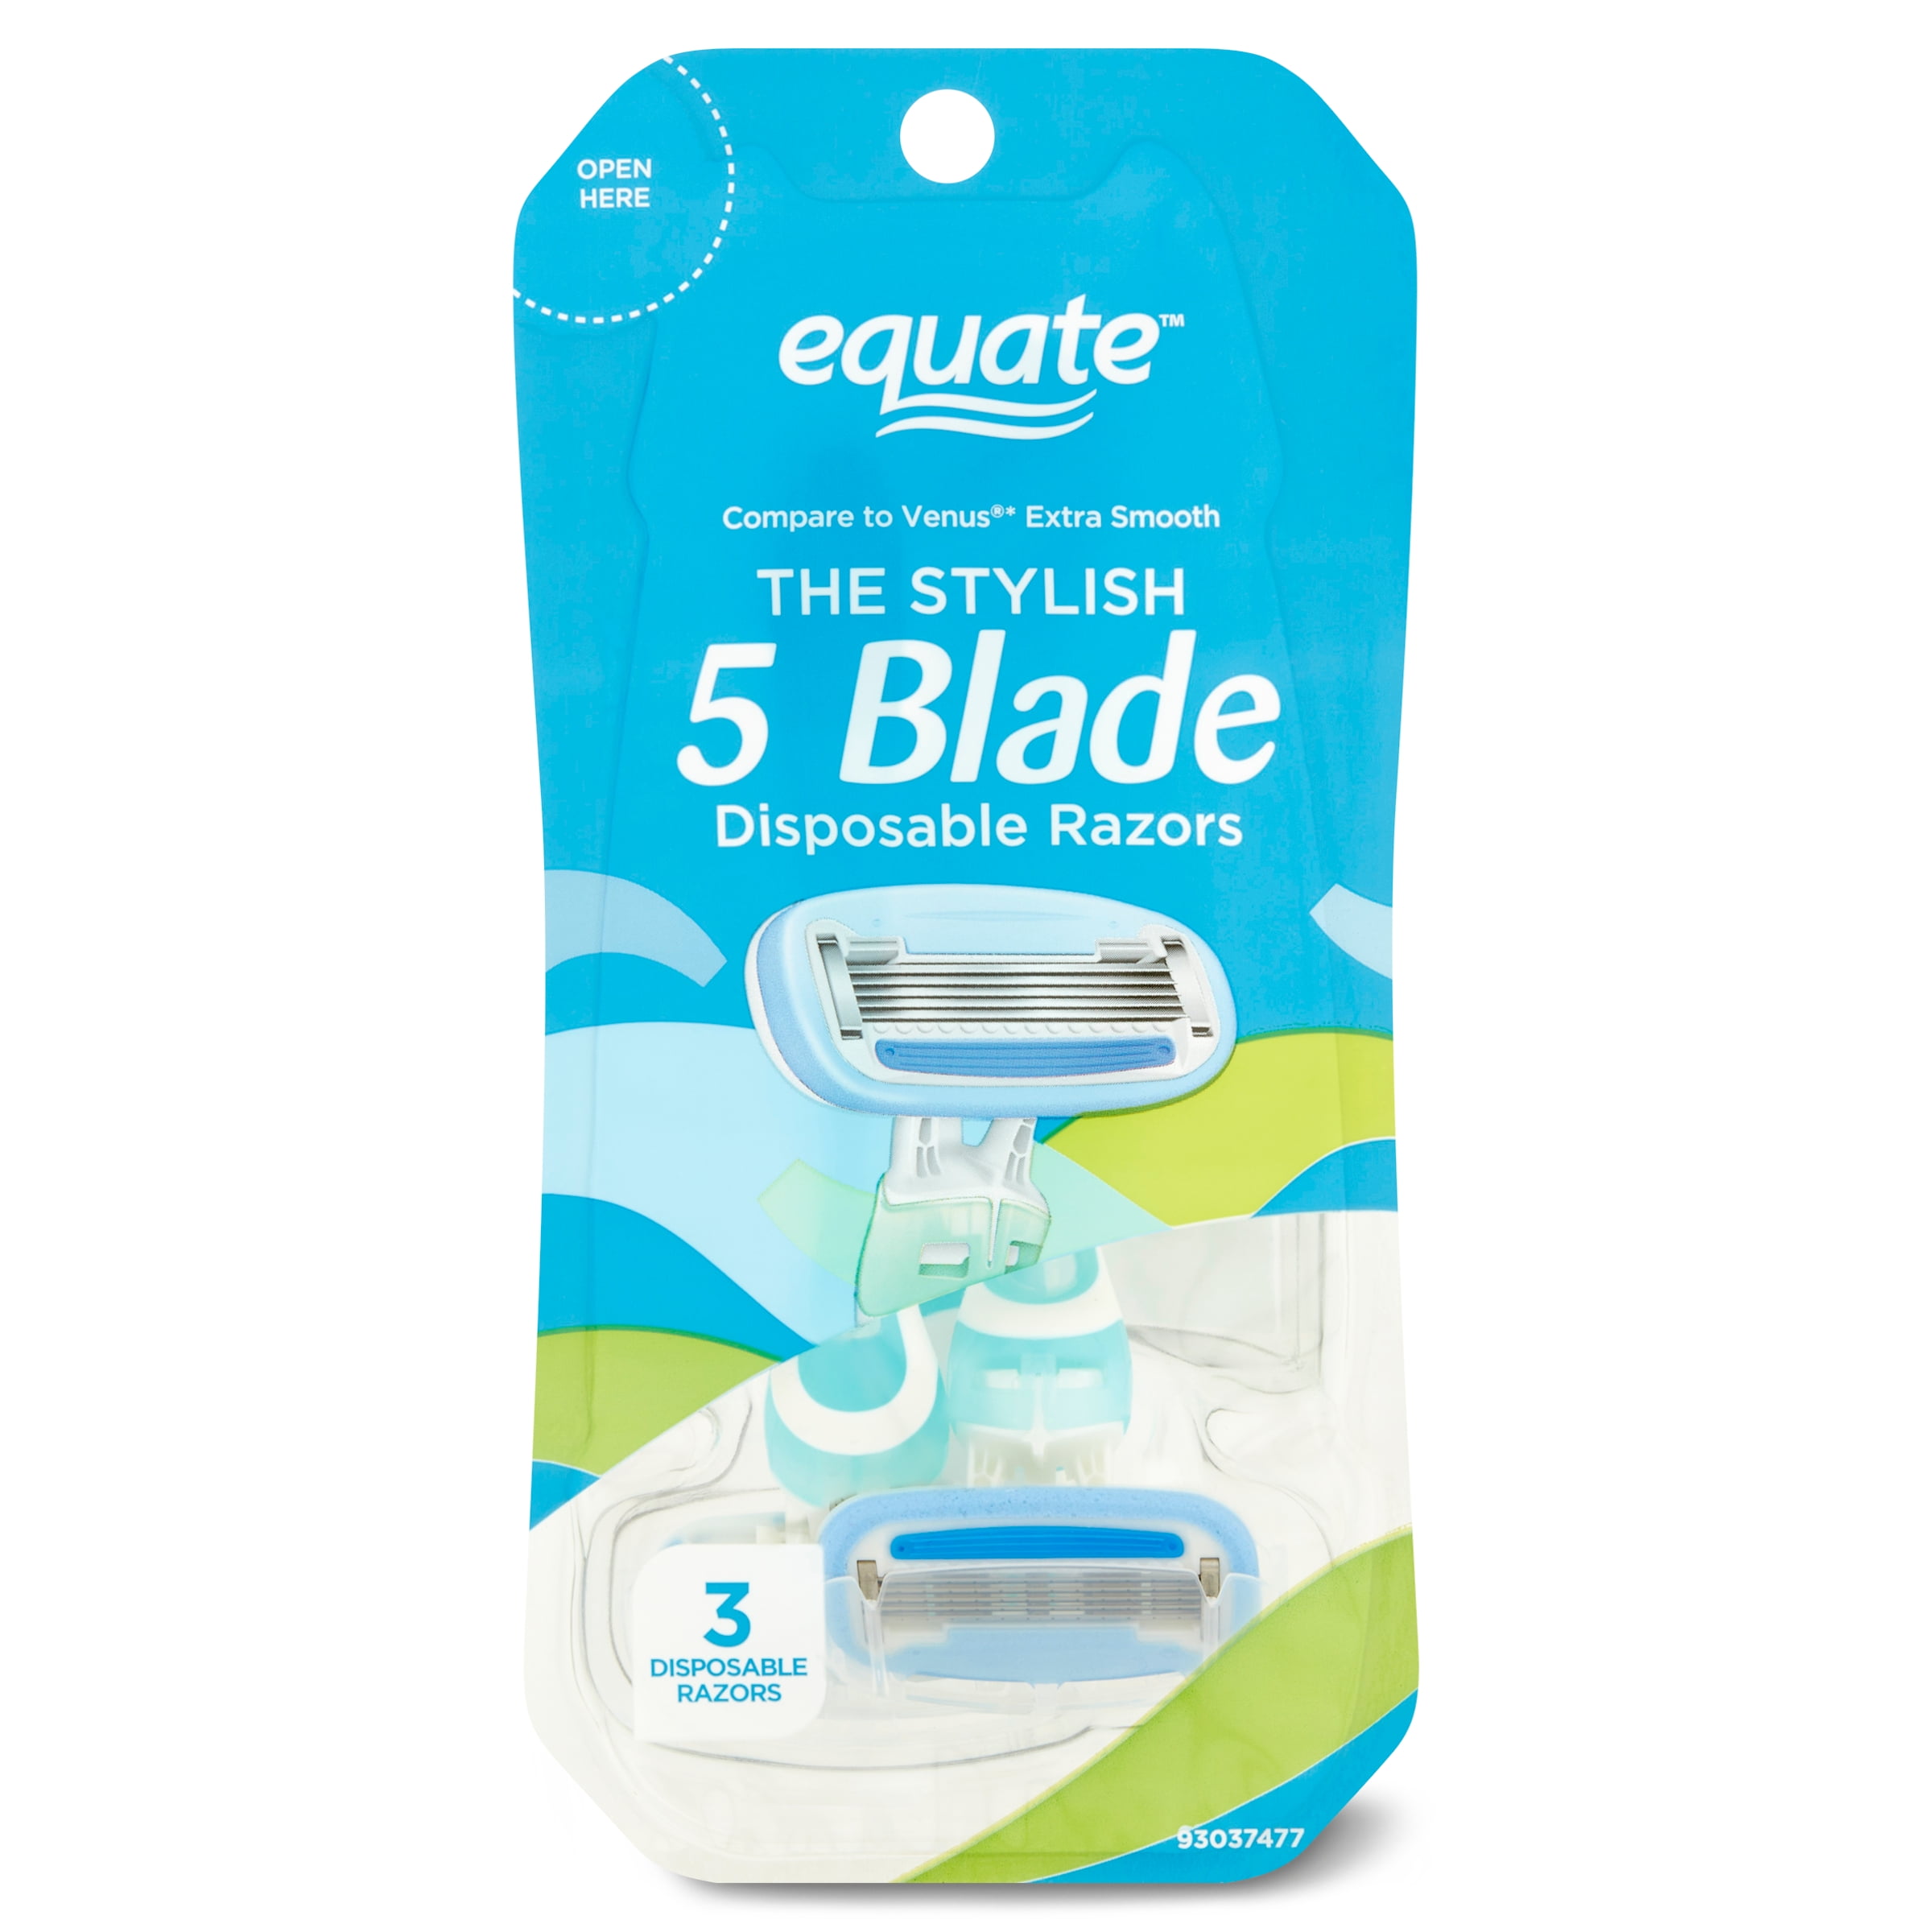 Equate Women's 5 Blade Disposable Razors, 3 Count